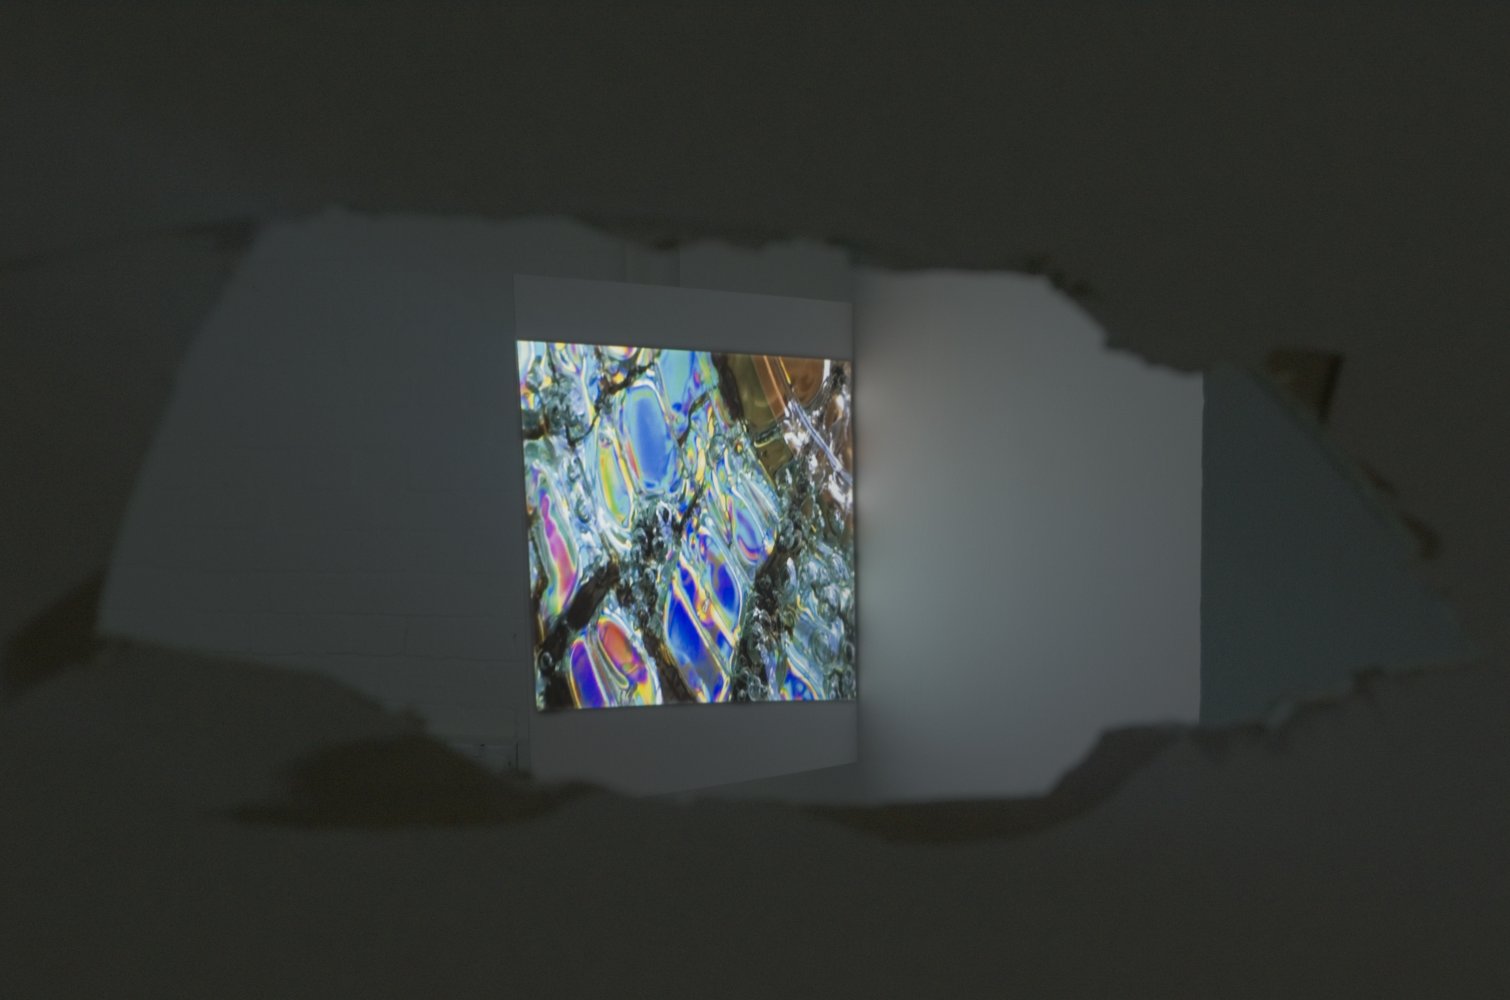 Paul Kneale, SEO and Co. (2014) @ tank.tv installation view. Courtesy the artist.